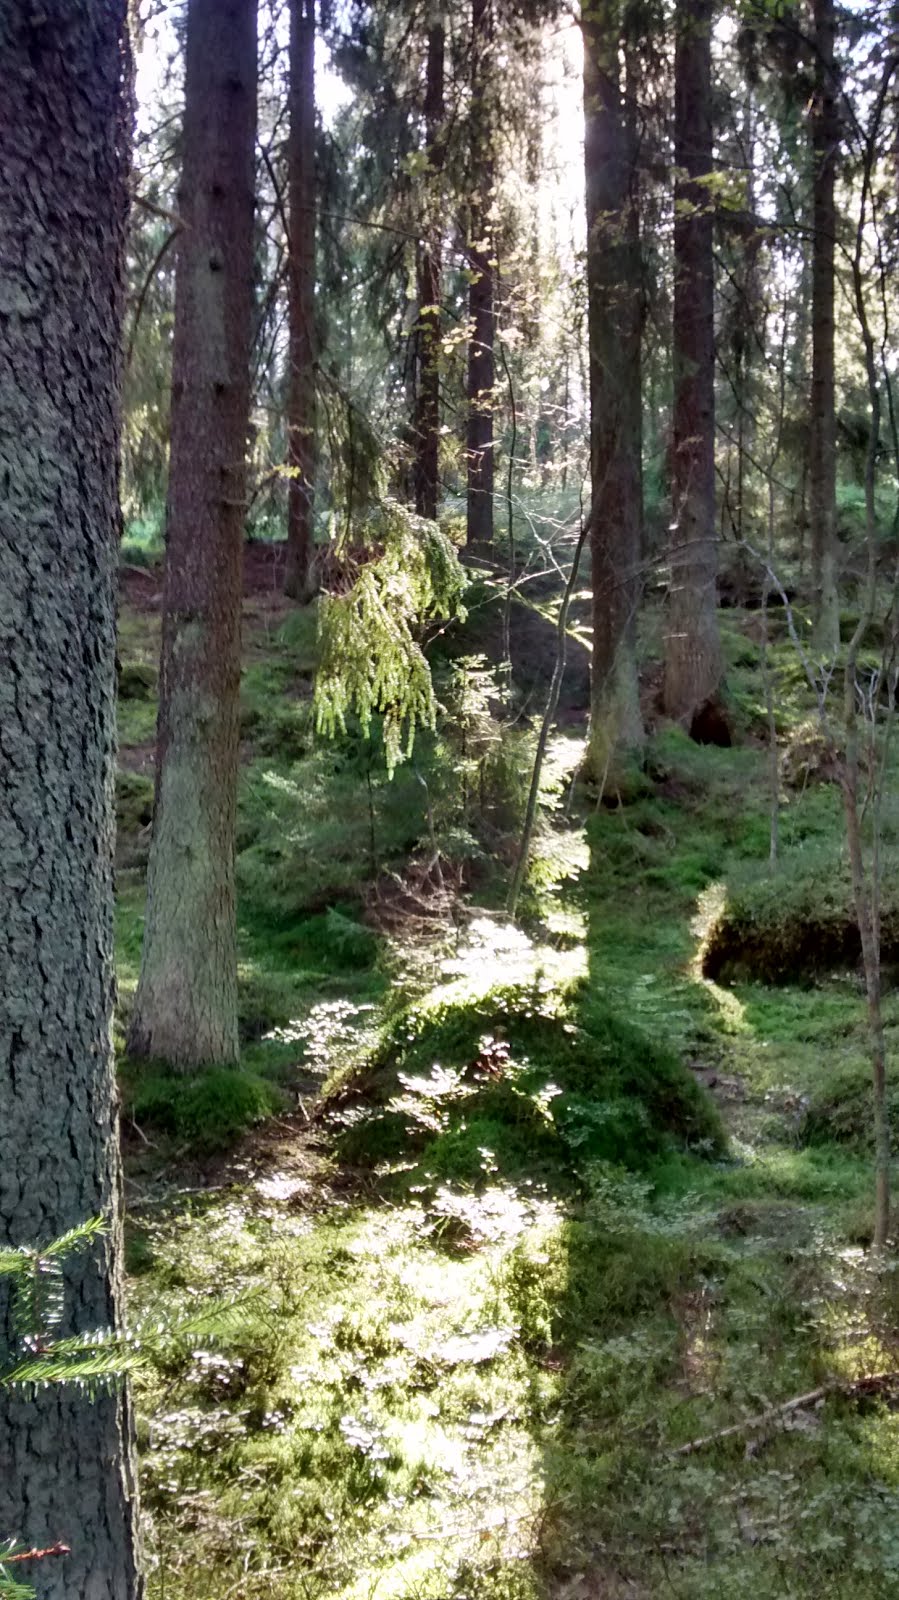 Light shining into the Finnish forest